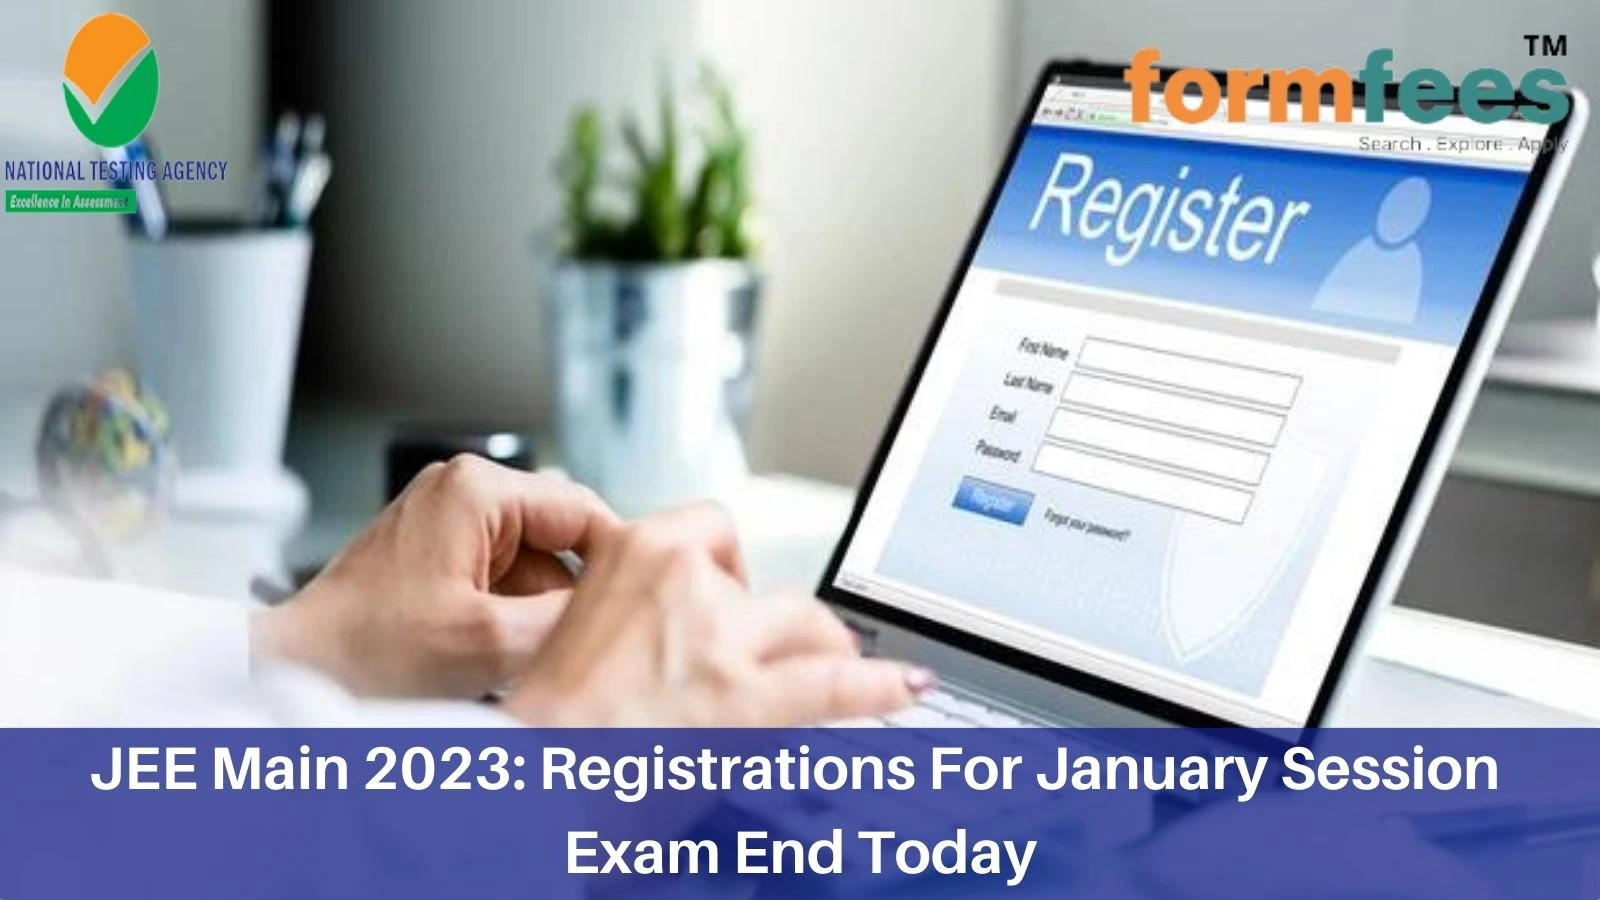 JEE Main 2023: Registrations For January Session Exam End Today